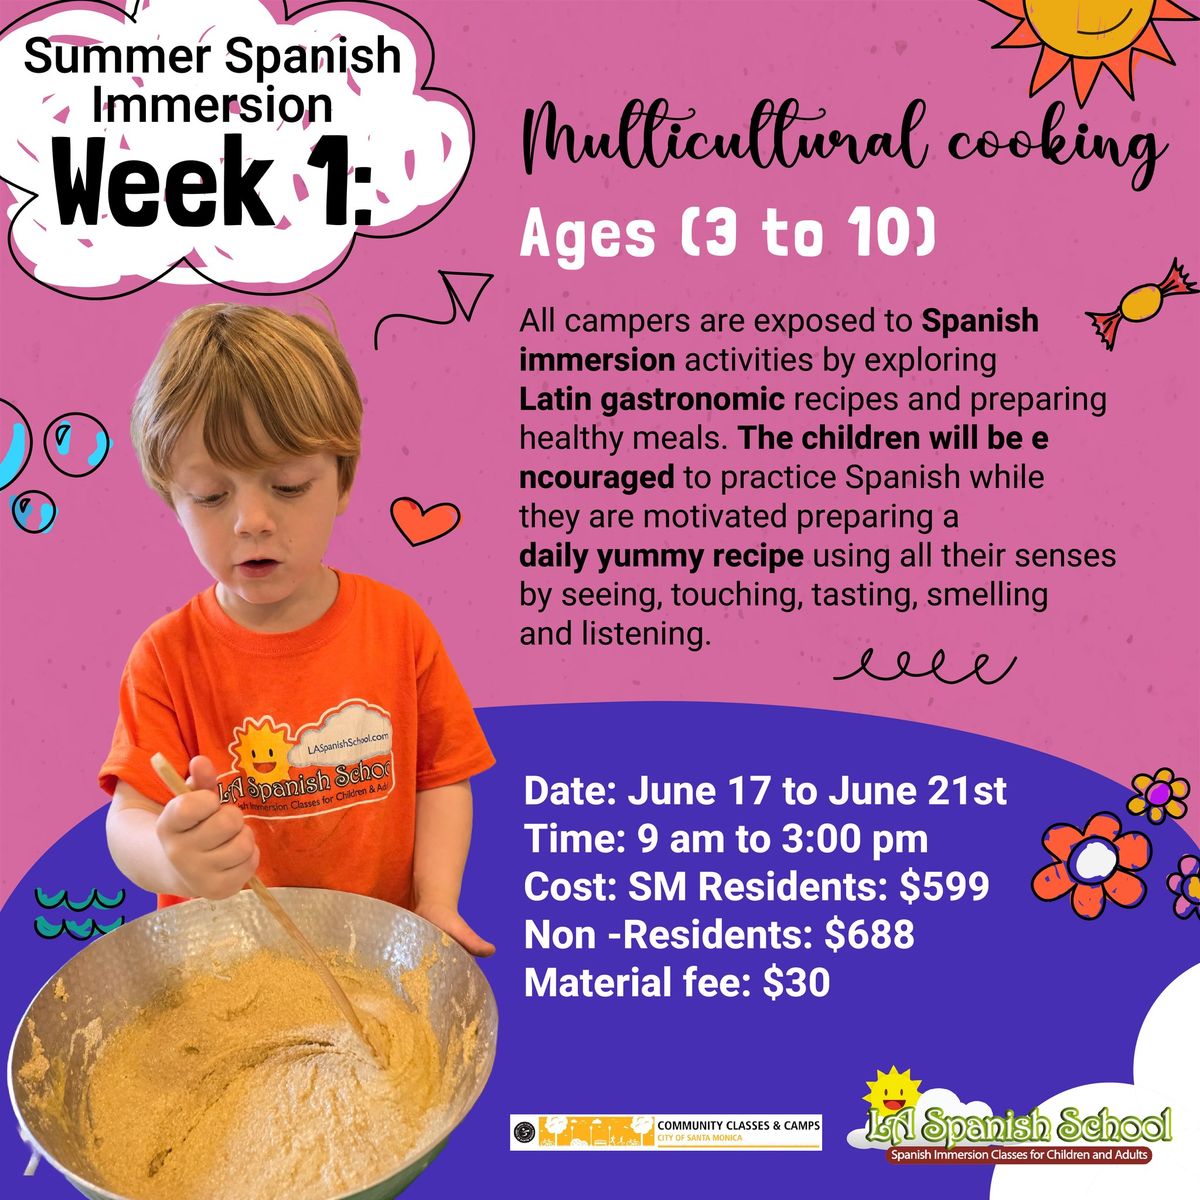 Summer Spanish Immersion Camps (Week 1)